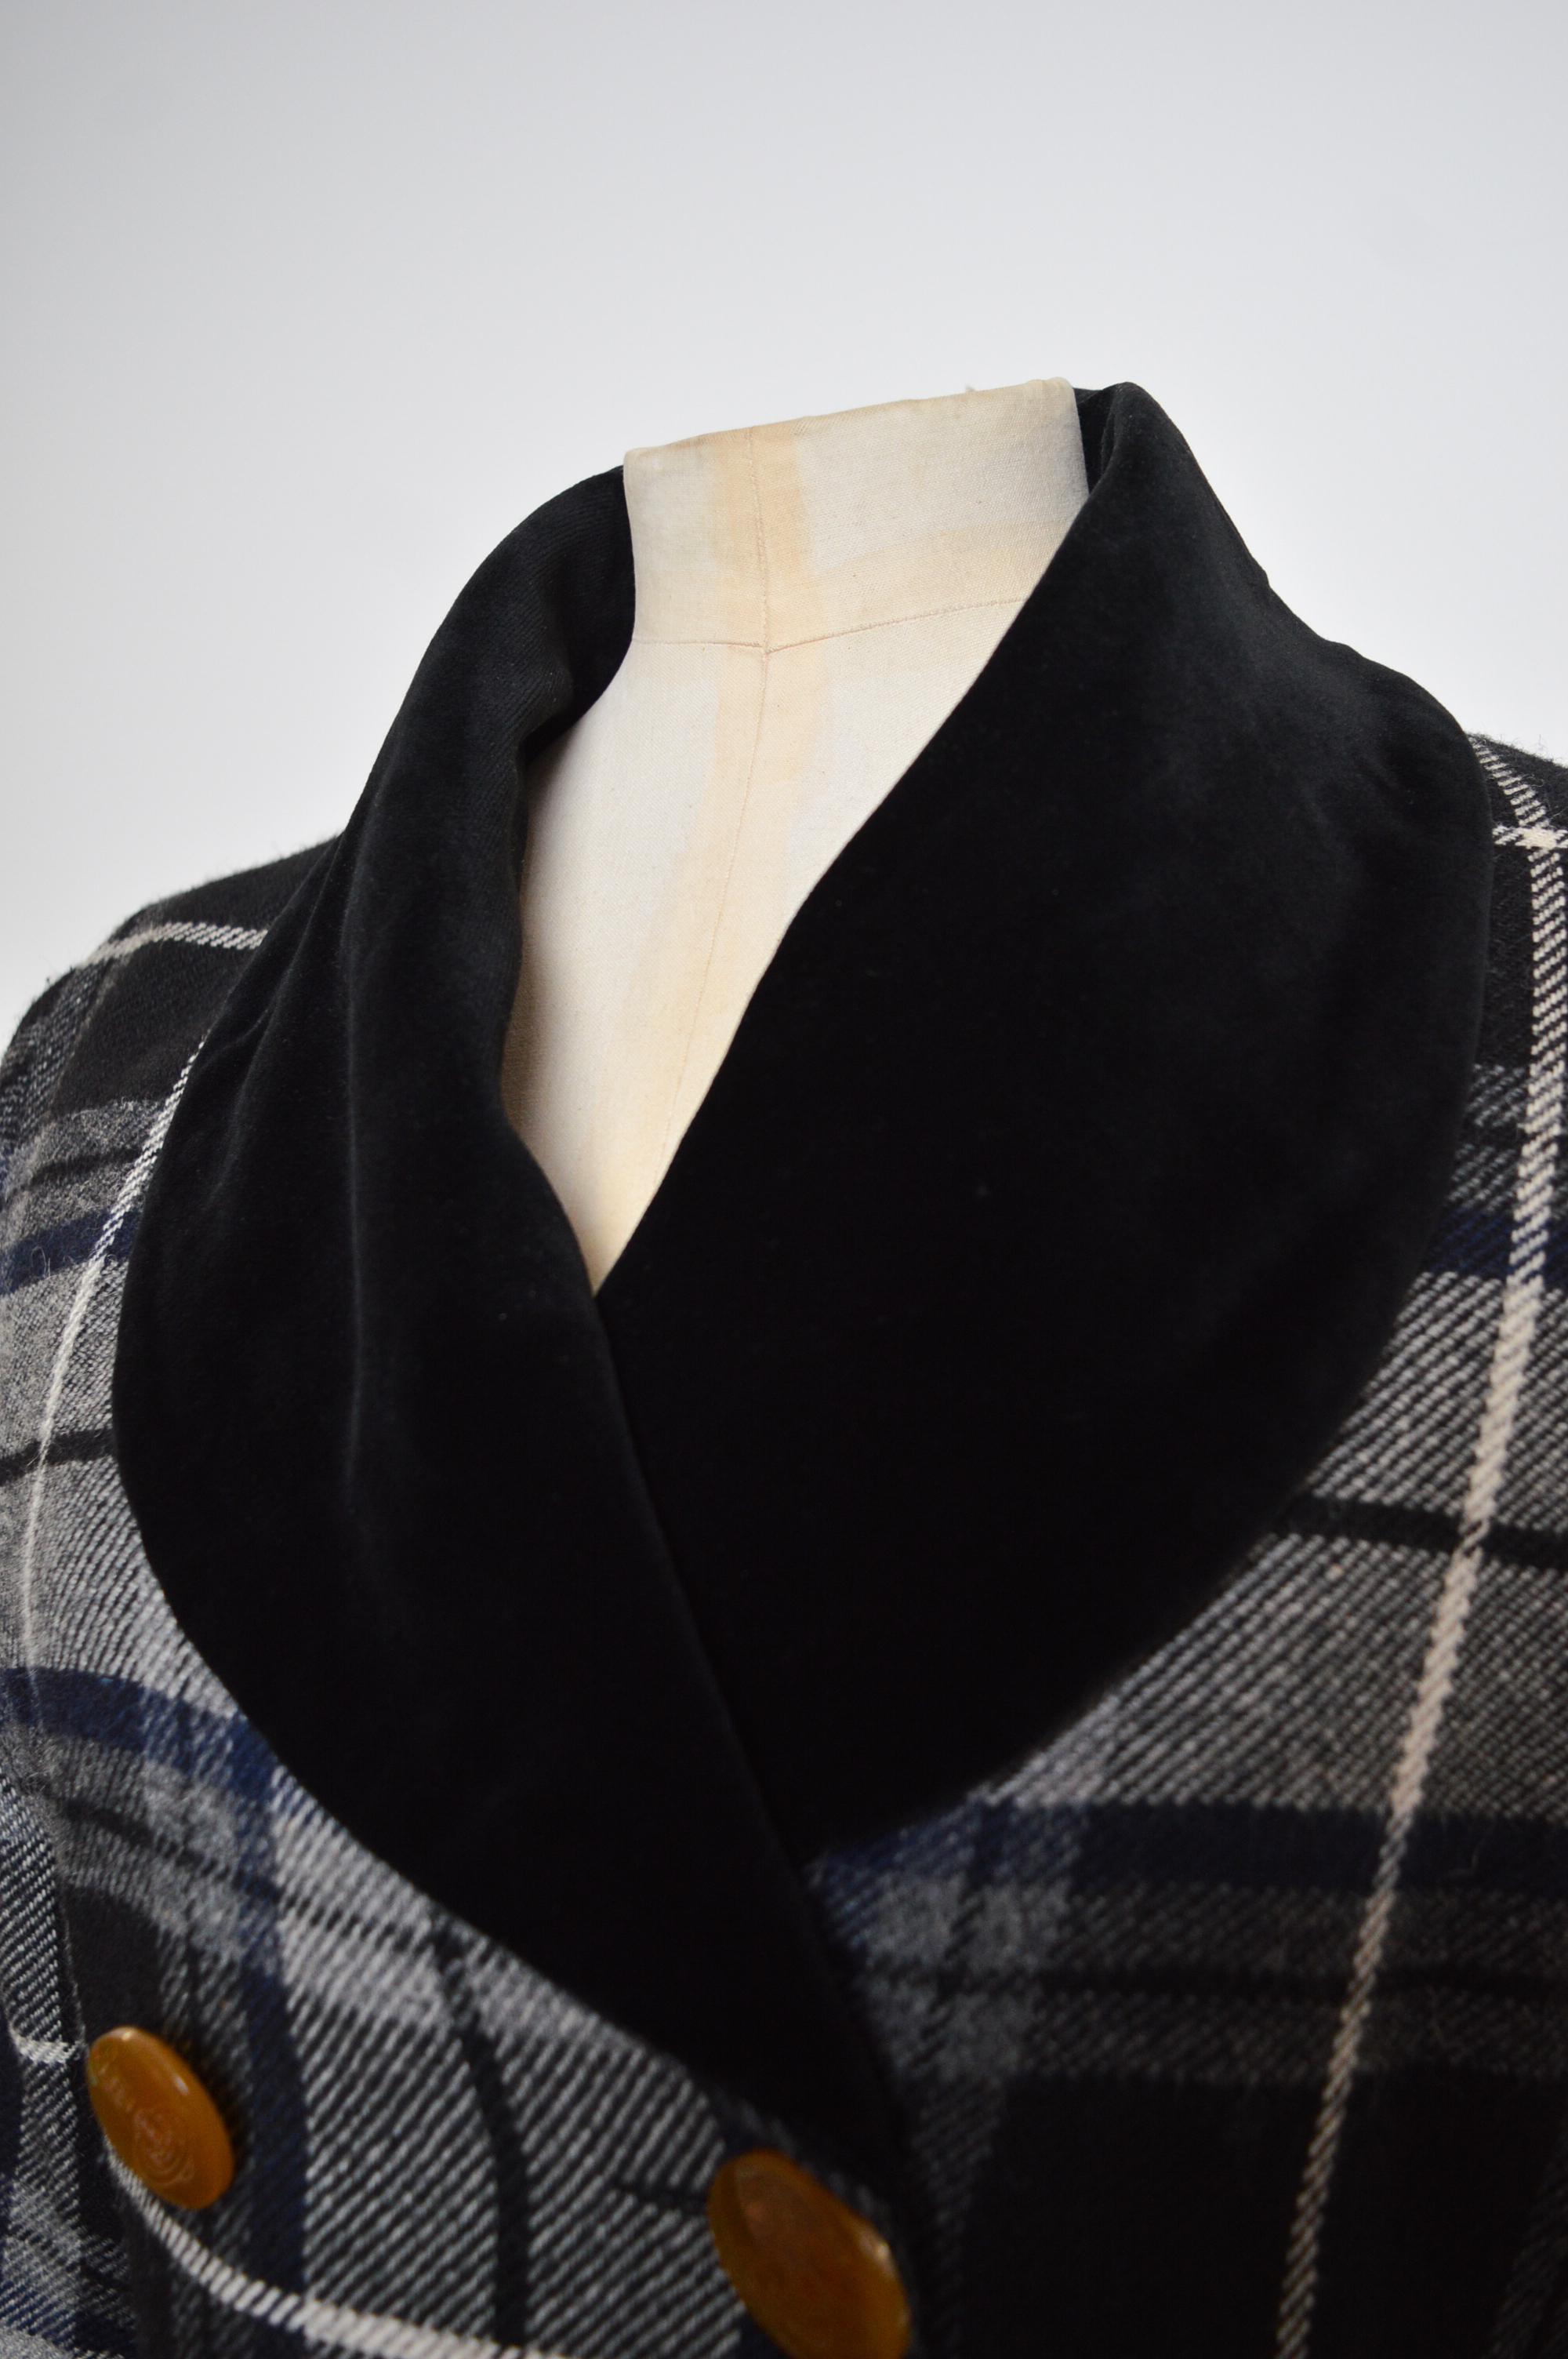 Rare Vivienne Westwood 3 Suisses AW 1995/ 1996 Collab Checked Tartan Wool Coat  For Sale 4